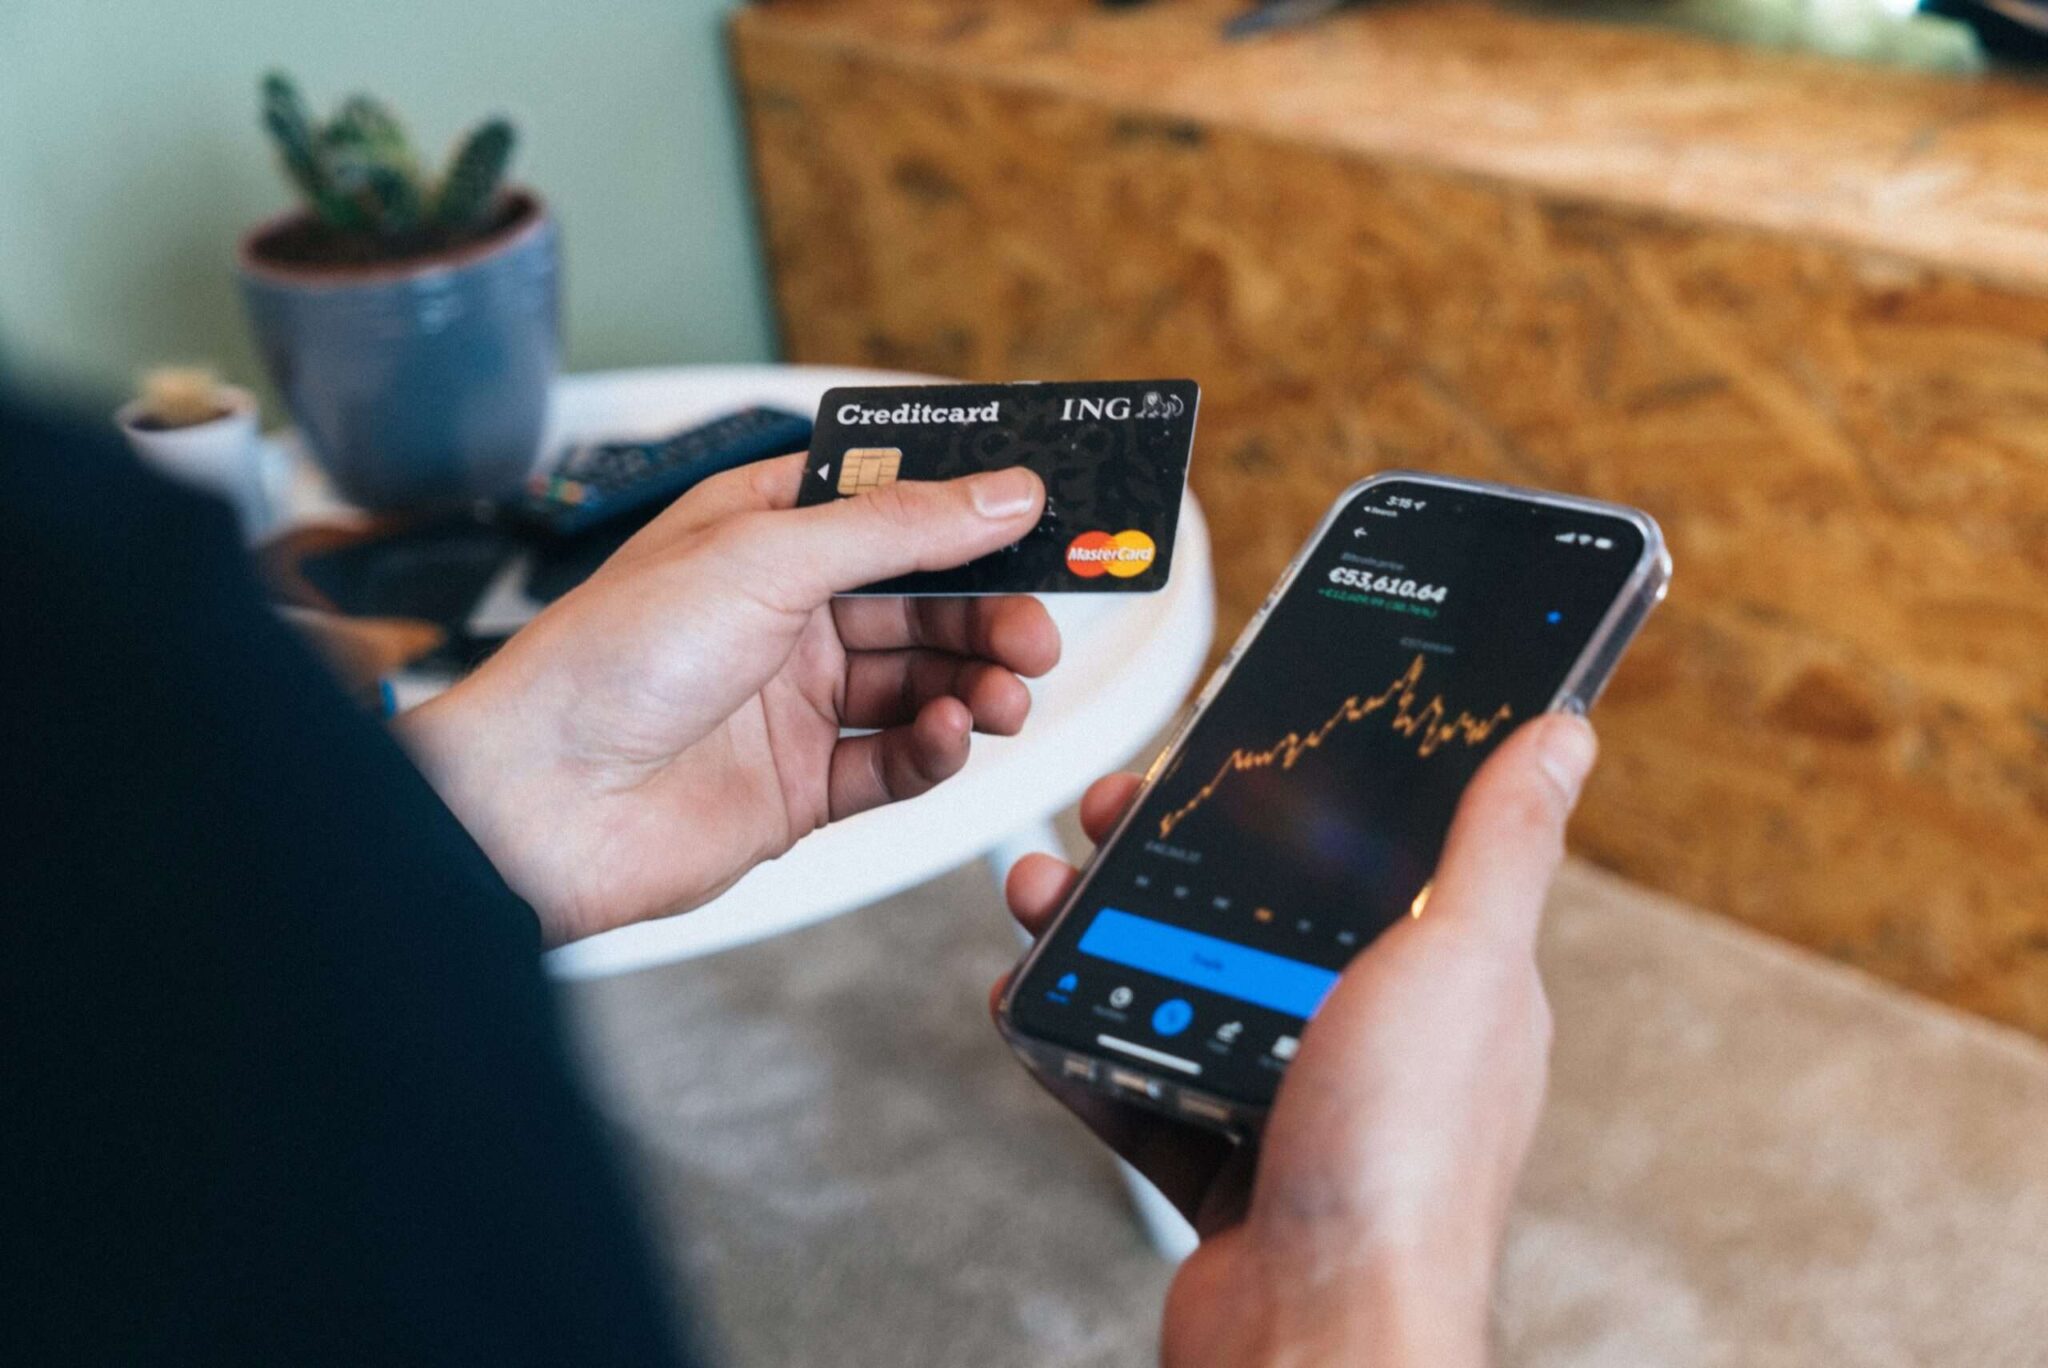 A credit card and phone with training indices to represent Mastercard's acknowledgement of the potential value of Blockchain